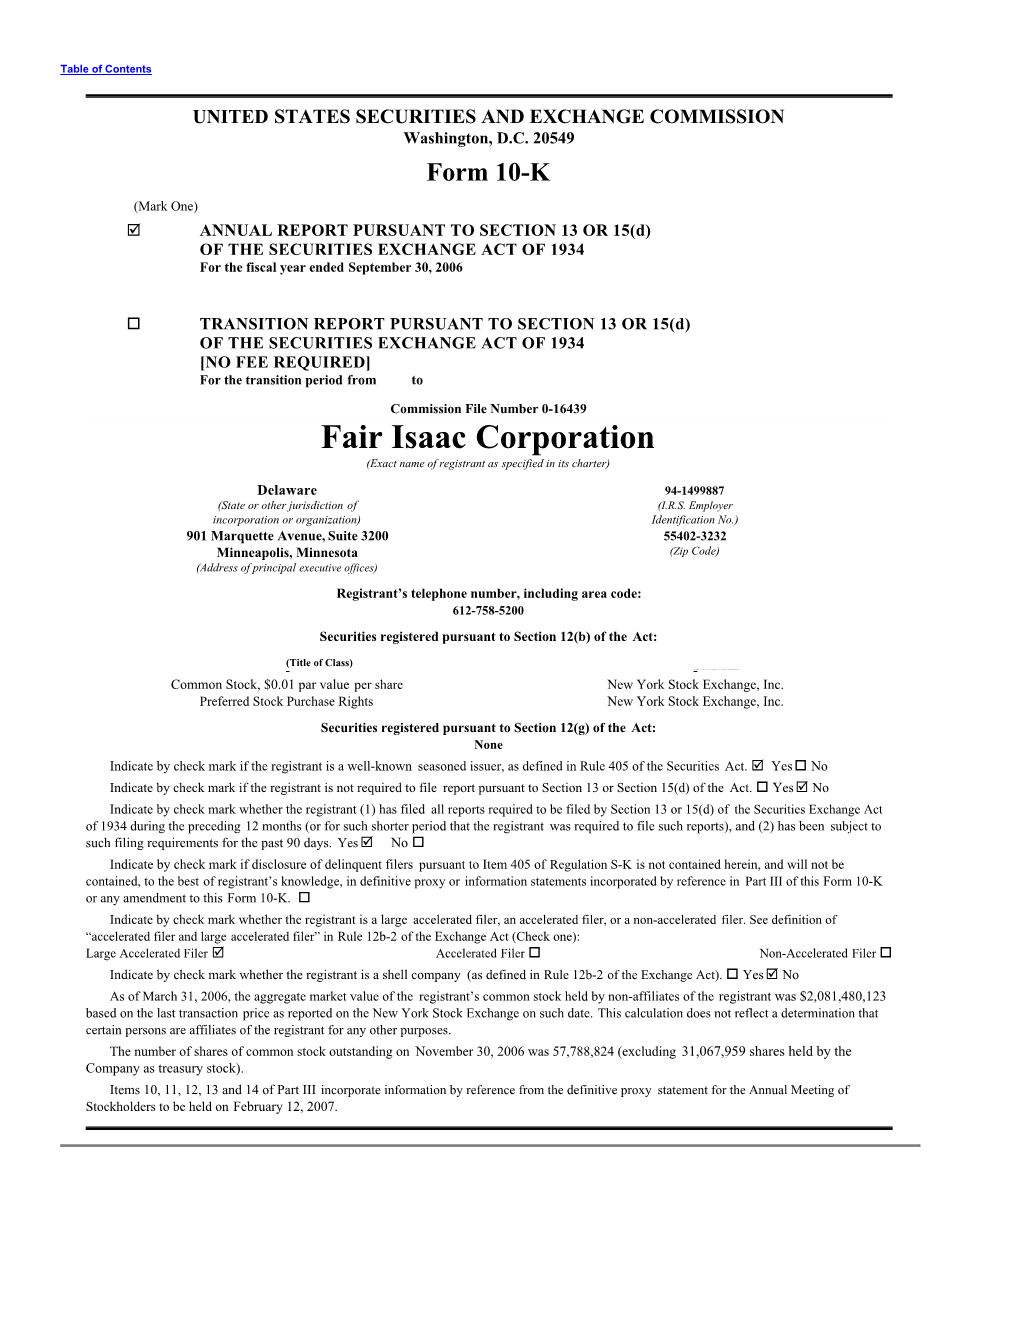 Fair Isaac Corporation (Exact Name of Registrant As Specified in Its Charter)